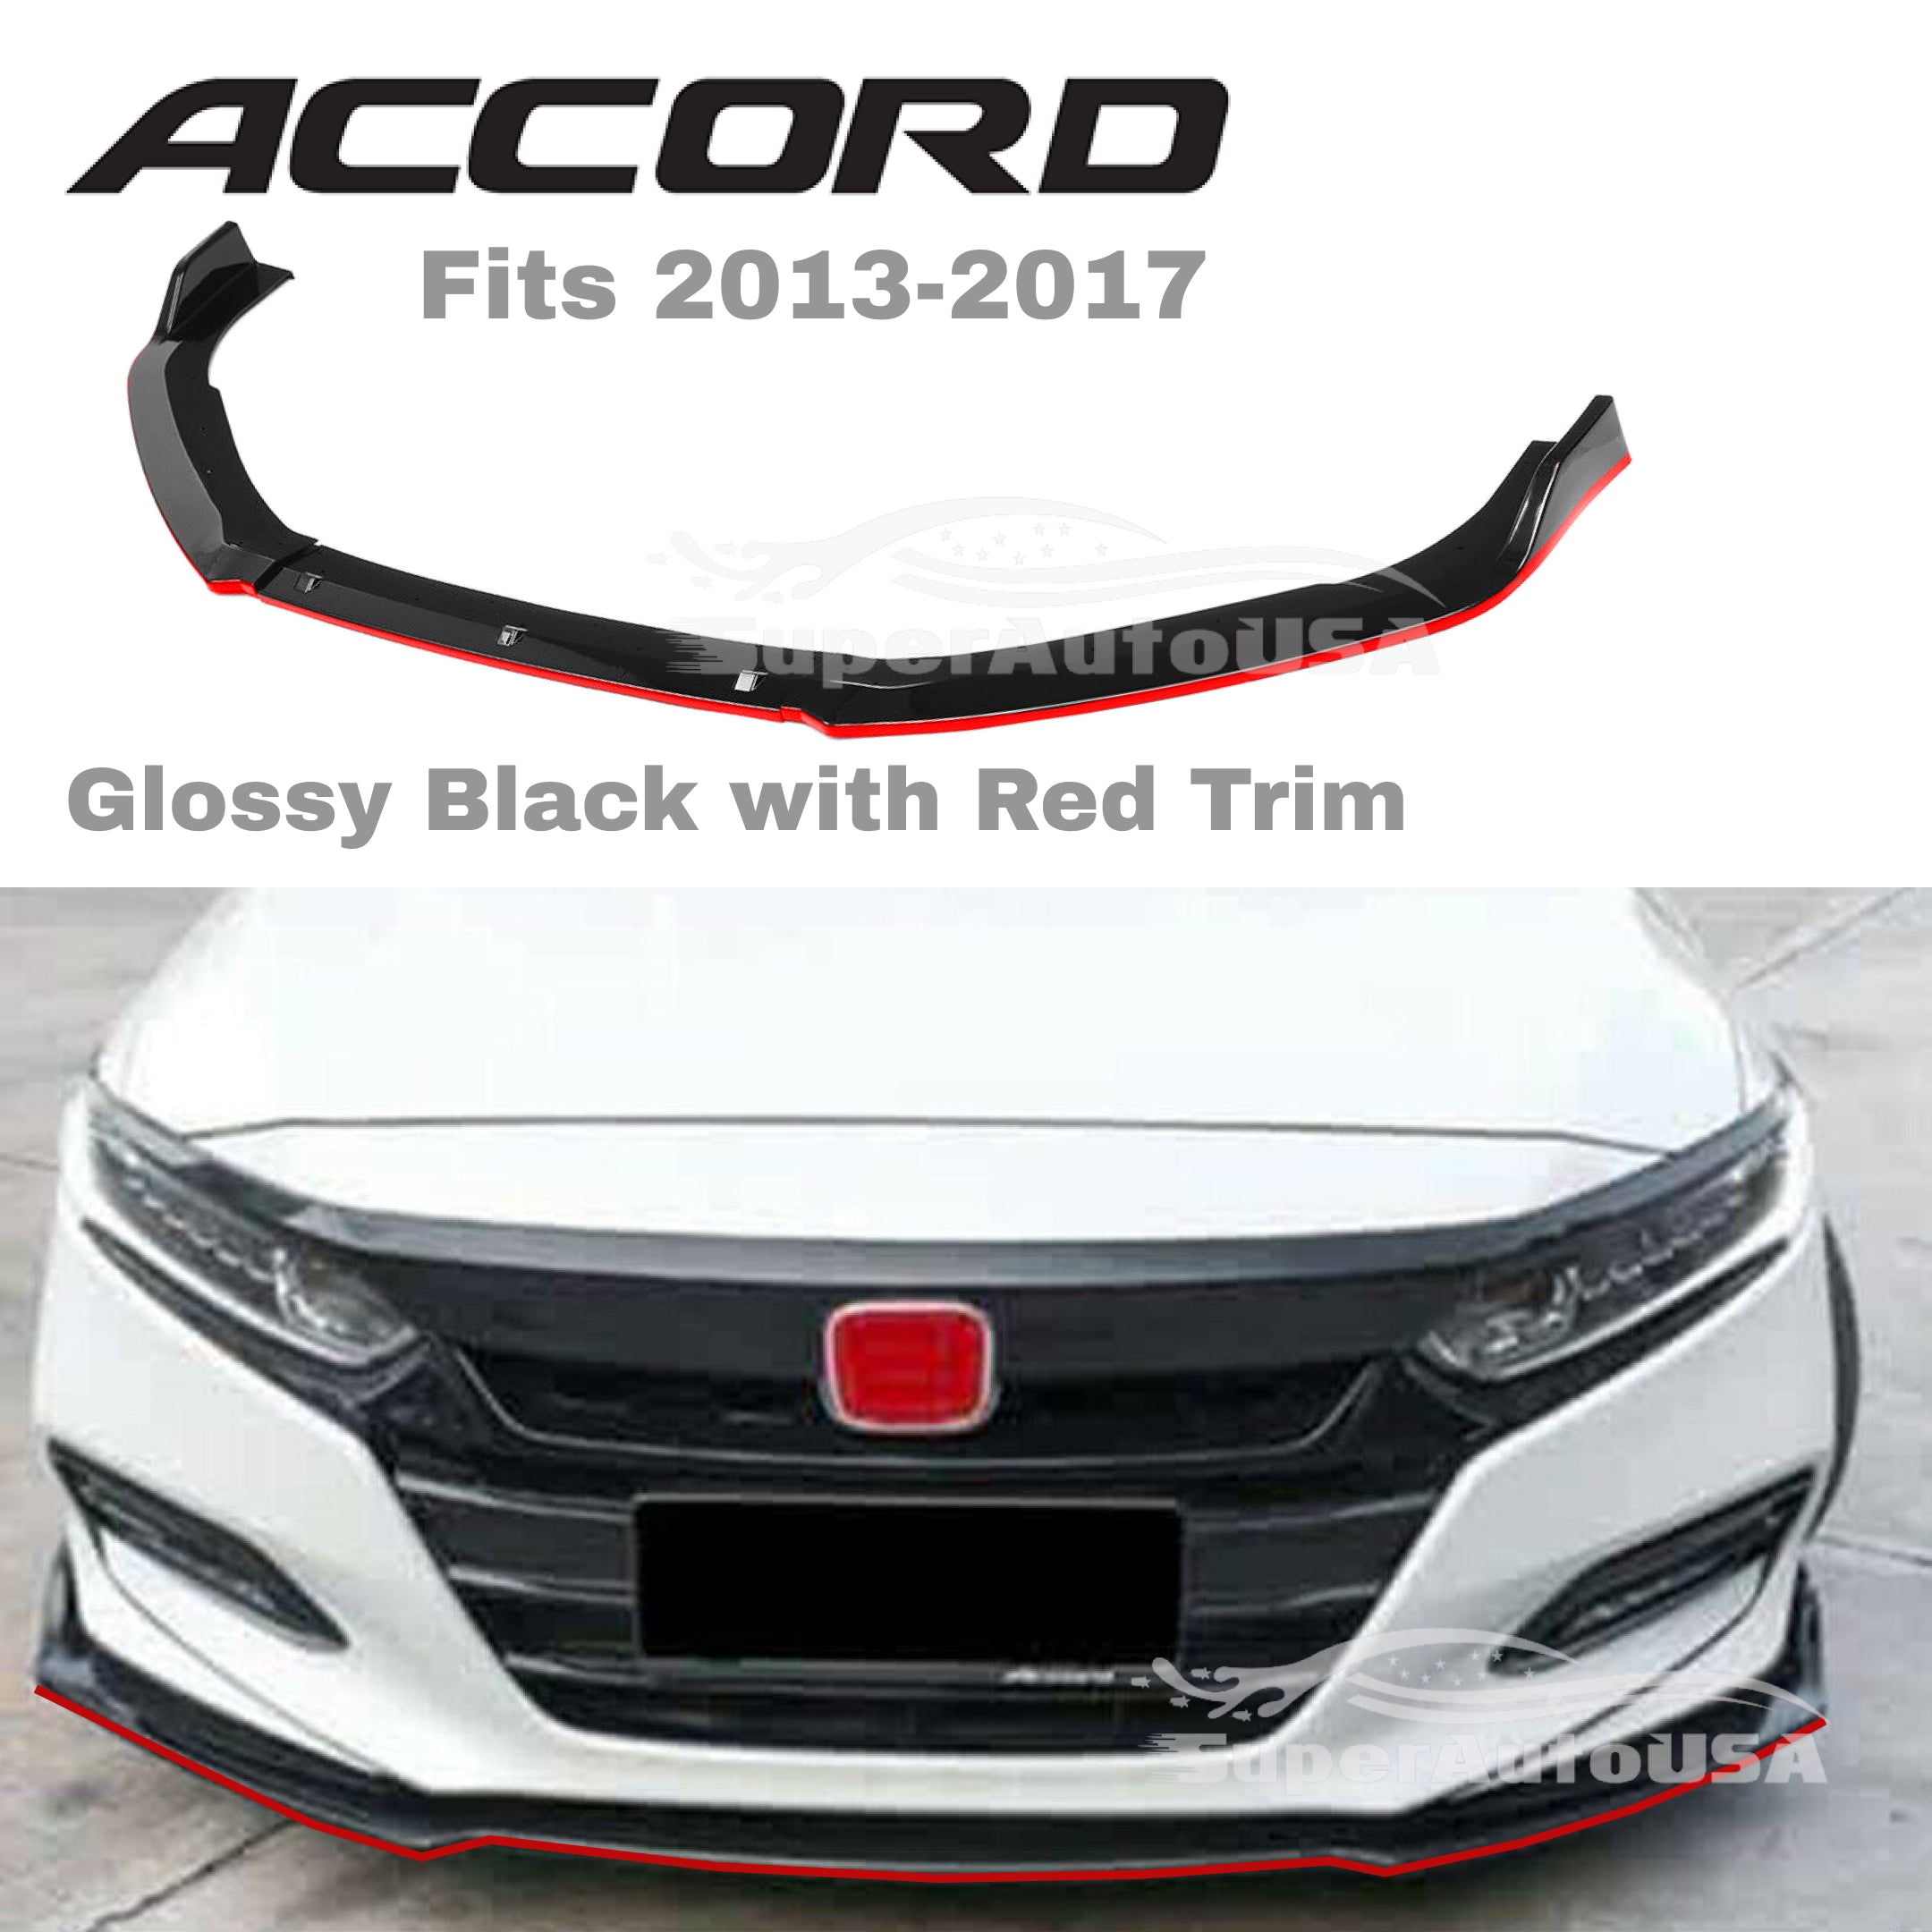 Fits 2013-2017 Honda Accord Front Bumper Lip Spoiler (Gloss Black with Red Trim) - 0